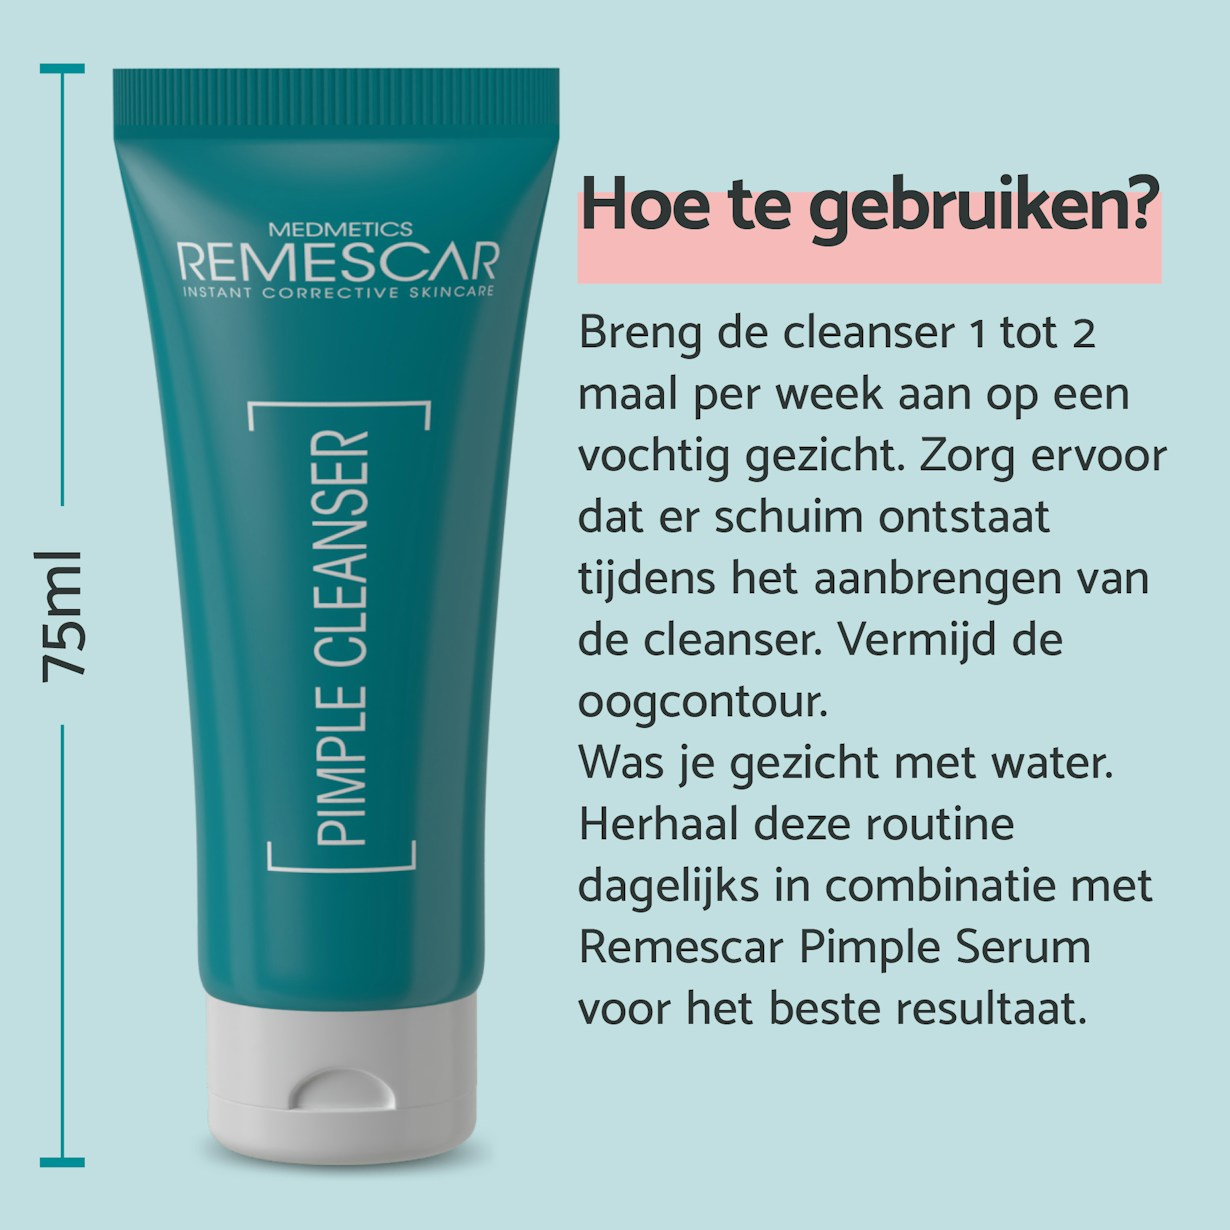 Remescar pdp pictures website and amazon 2000x2000px pimple cleanser3